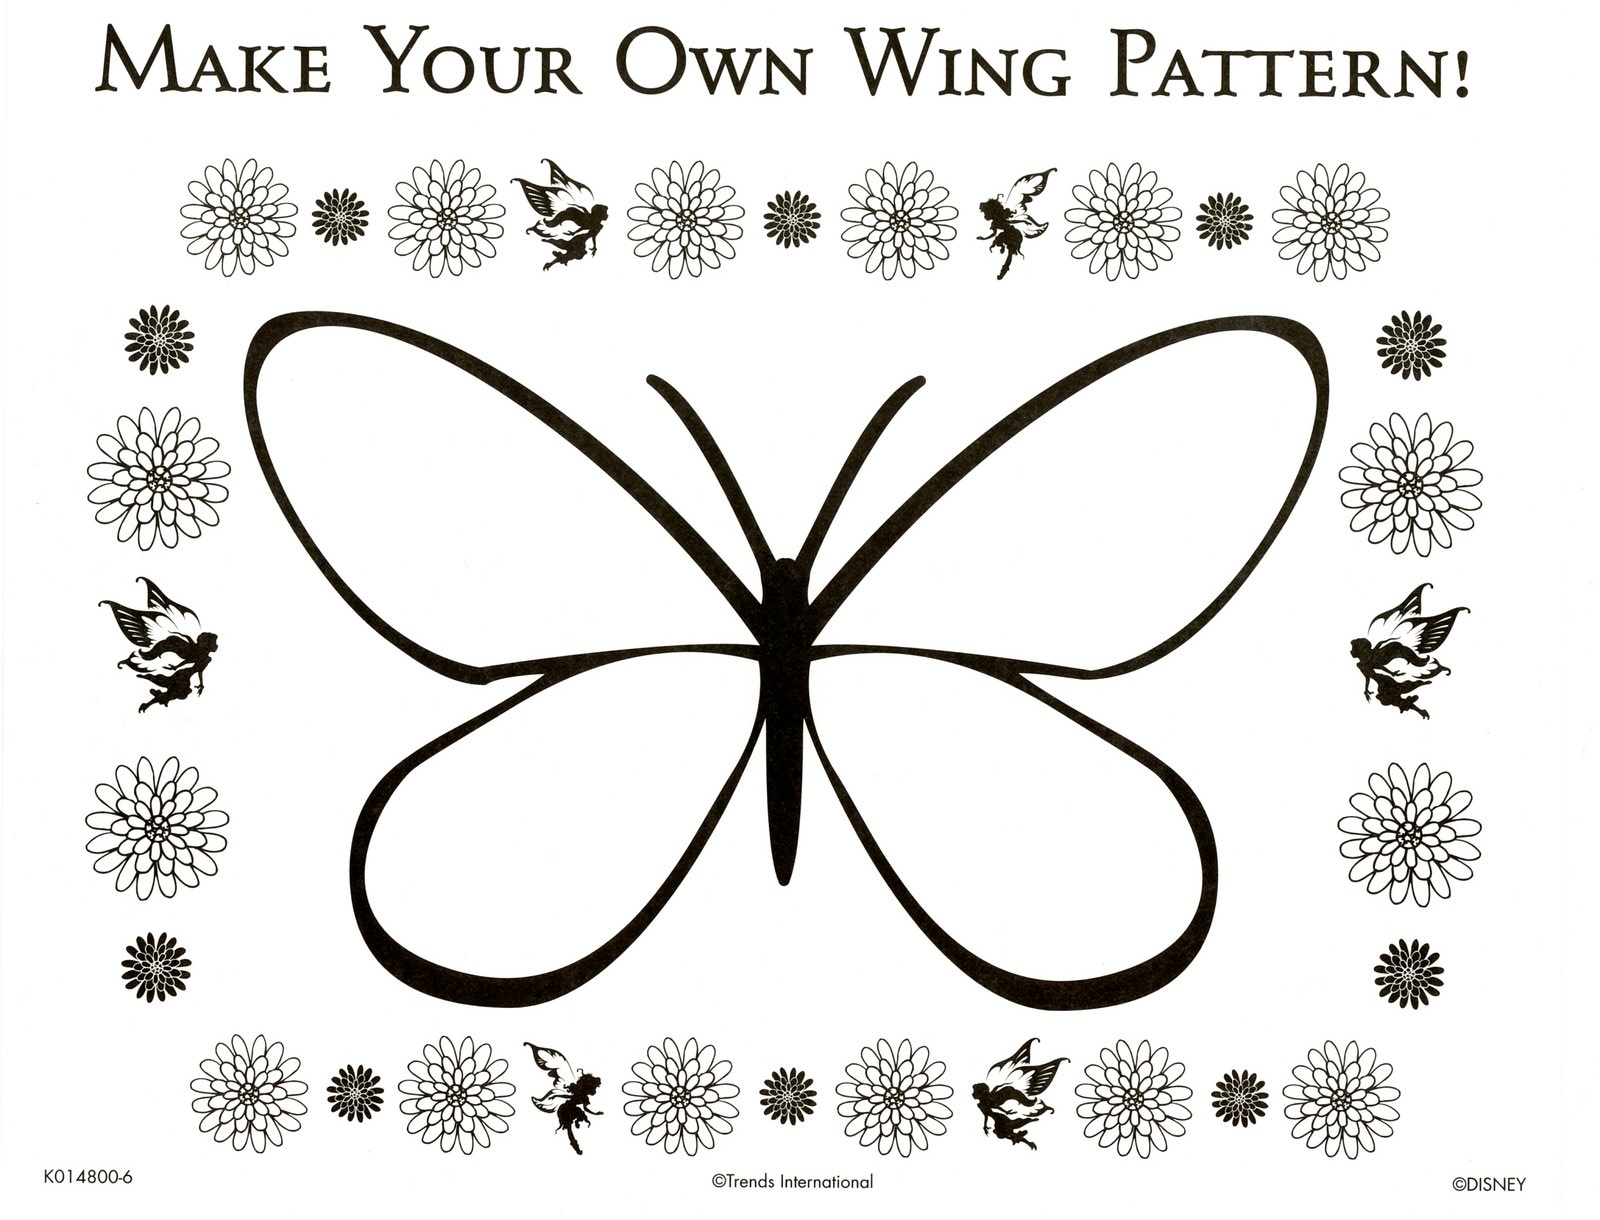 [Make+Your+Own+Wing+Pattern.JPG]